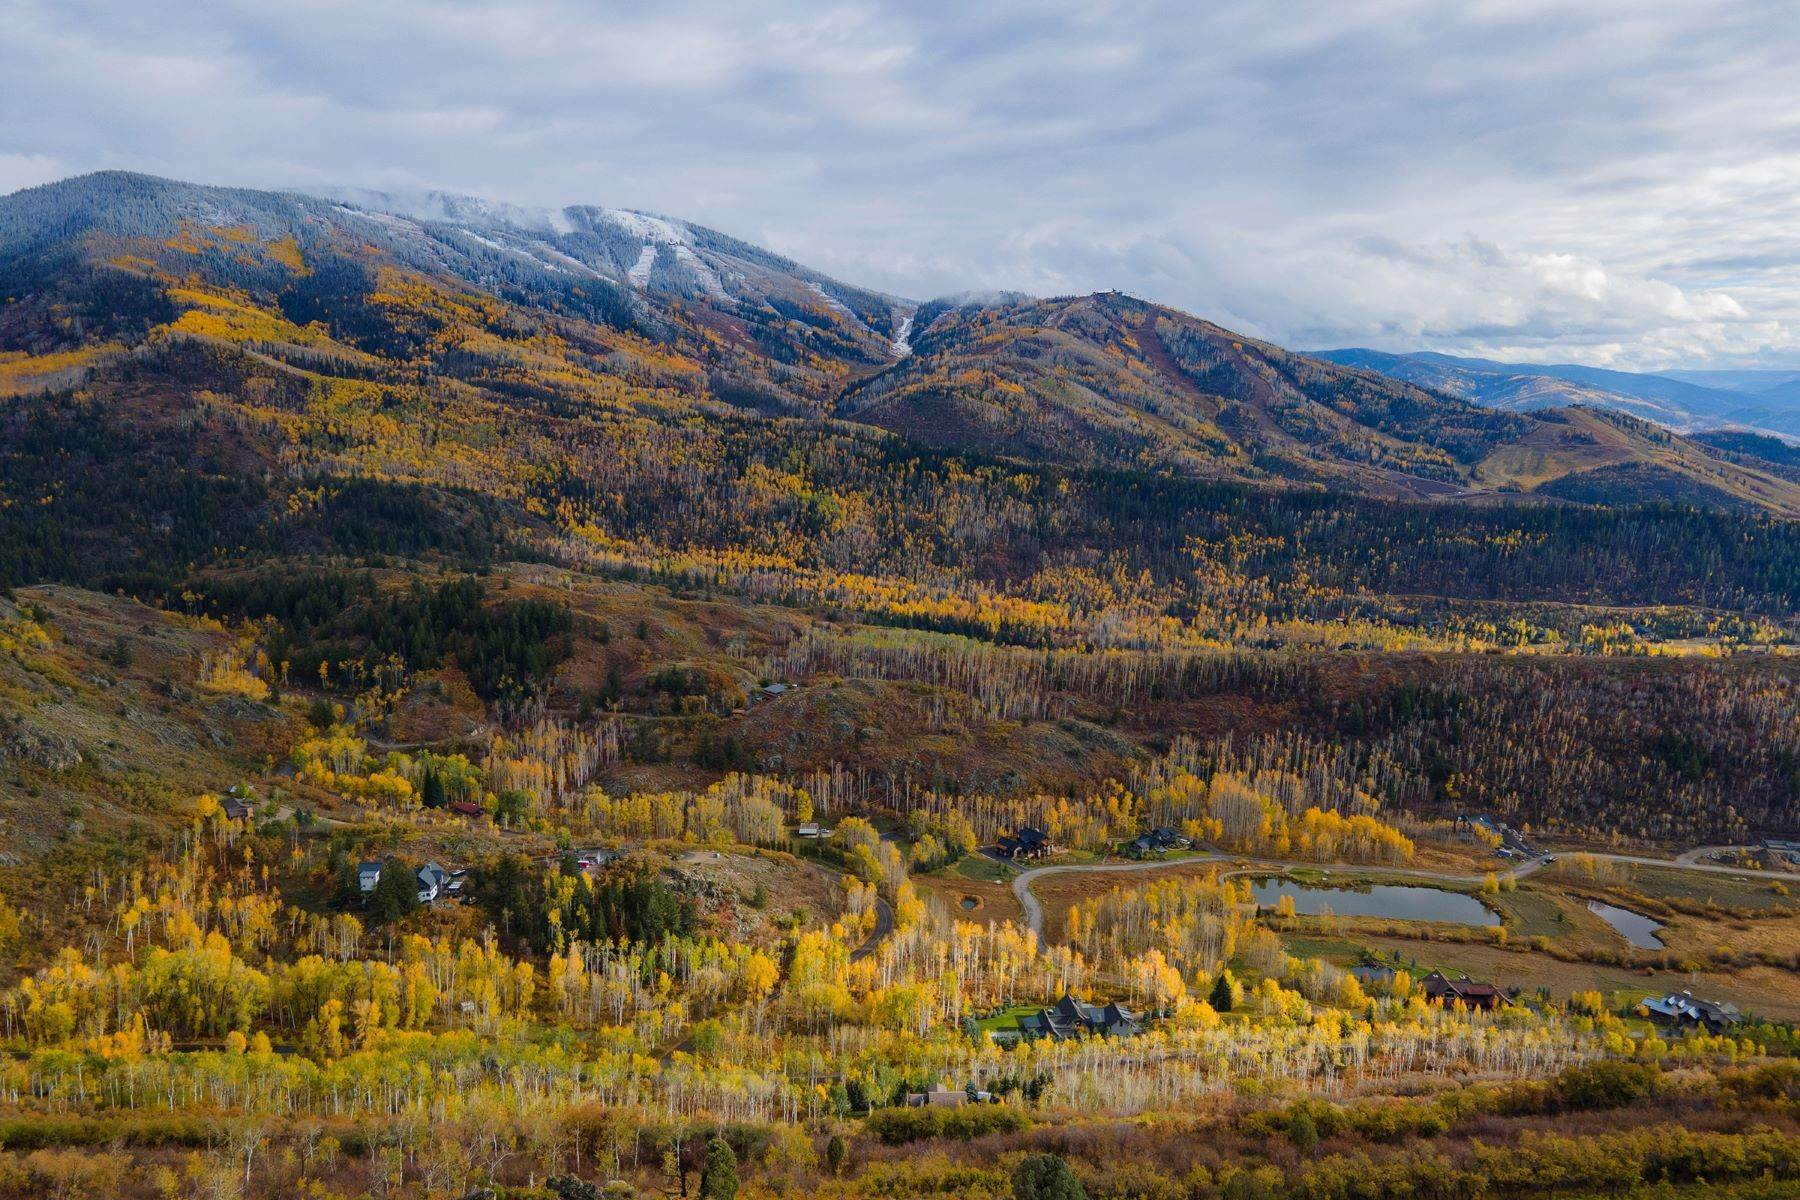 Property for Sale at Fish Creek Ridge 550 Huckelberry Lane Steamboat Springs, Colorado 80487 United States